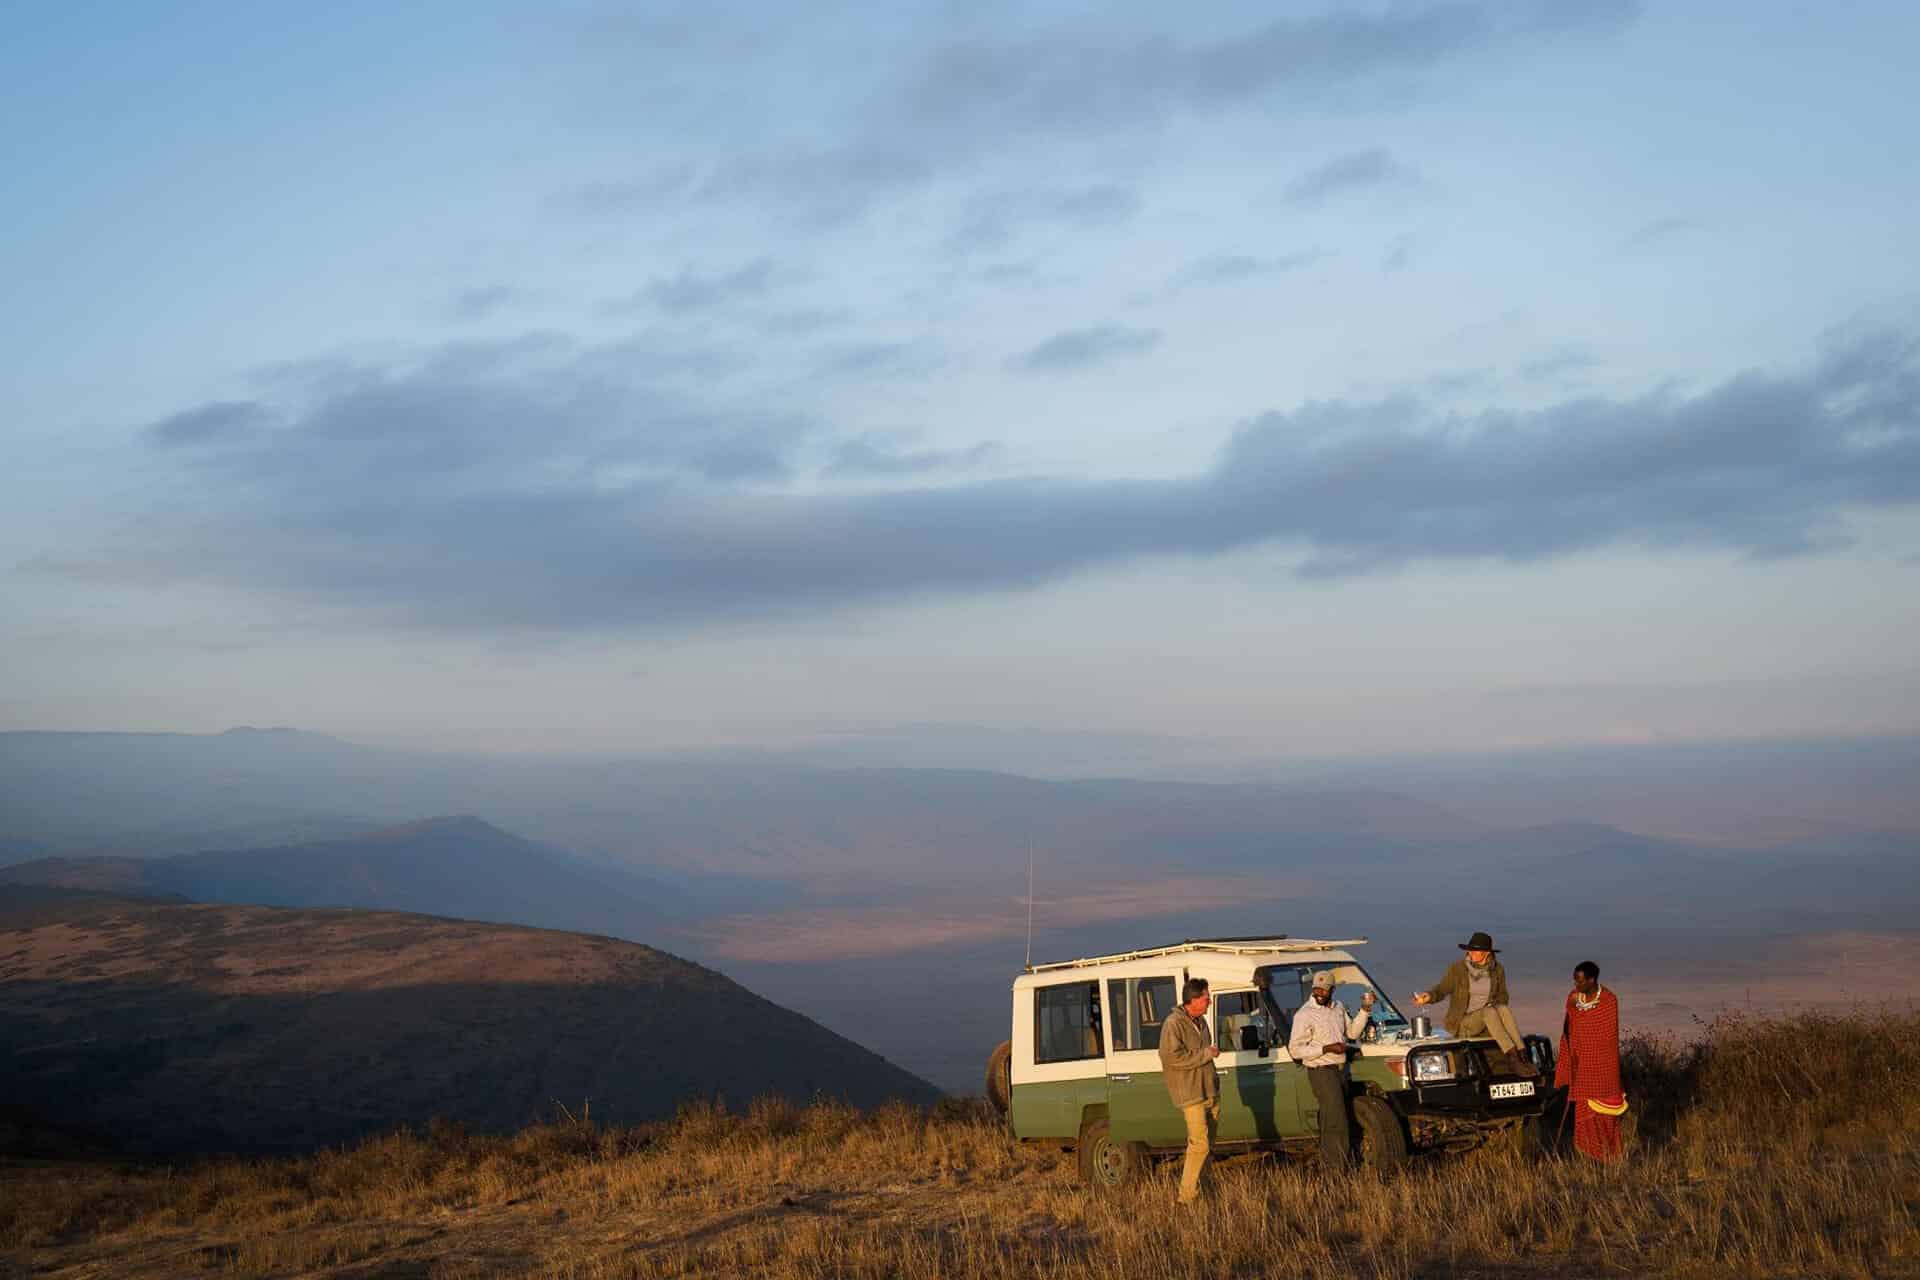 Safari vehicle with guests having a sunset drink on the crater rim